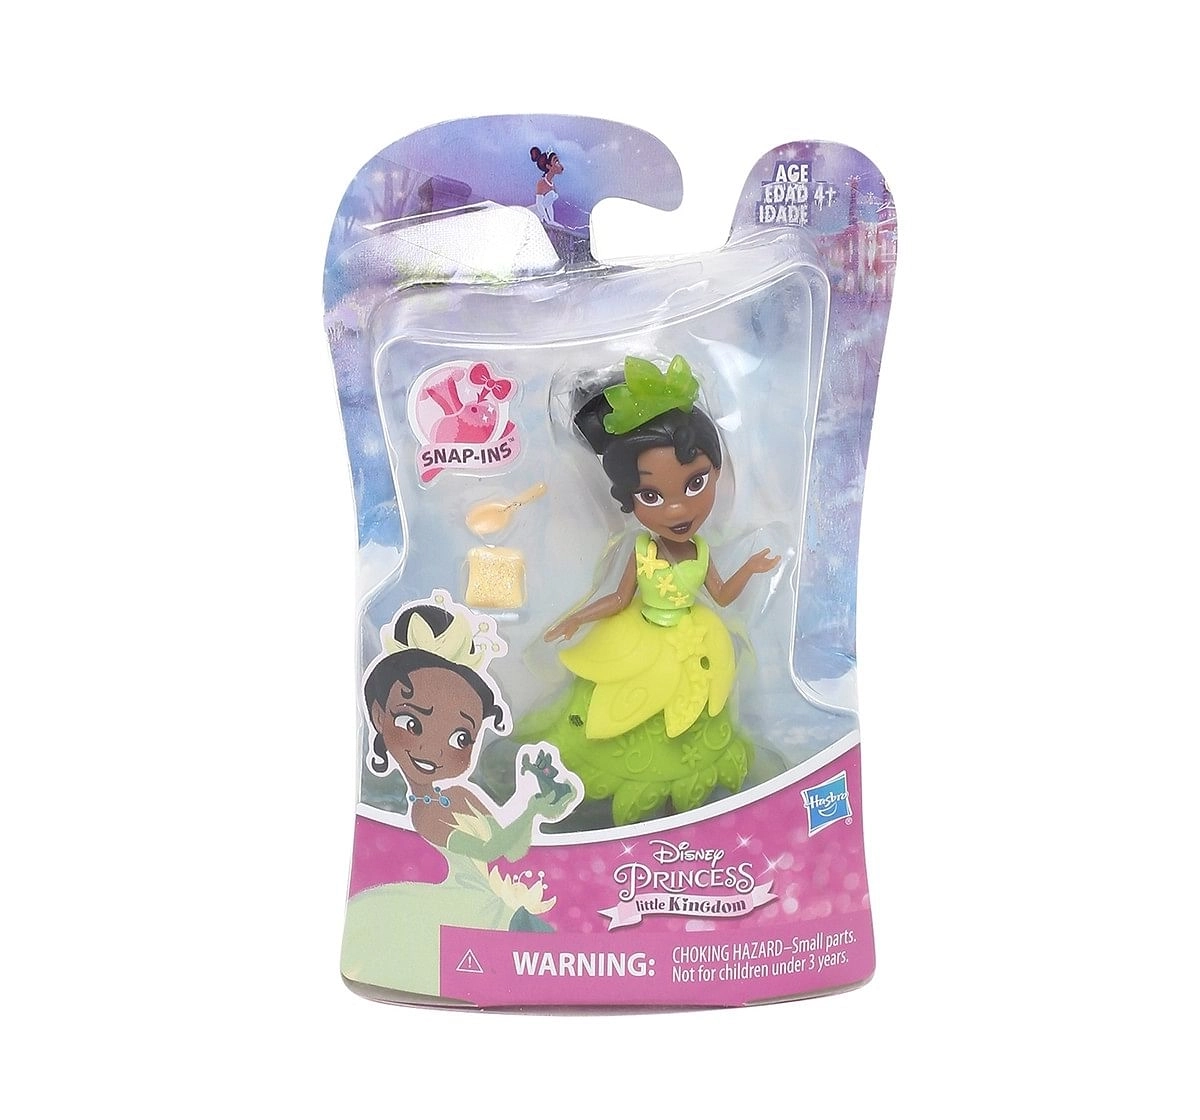 Disney Princess Little Kingdom Tiana Snap In Dolls & Accessories for age 4Y+ (Green)